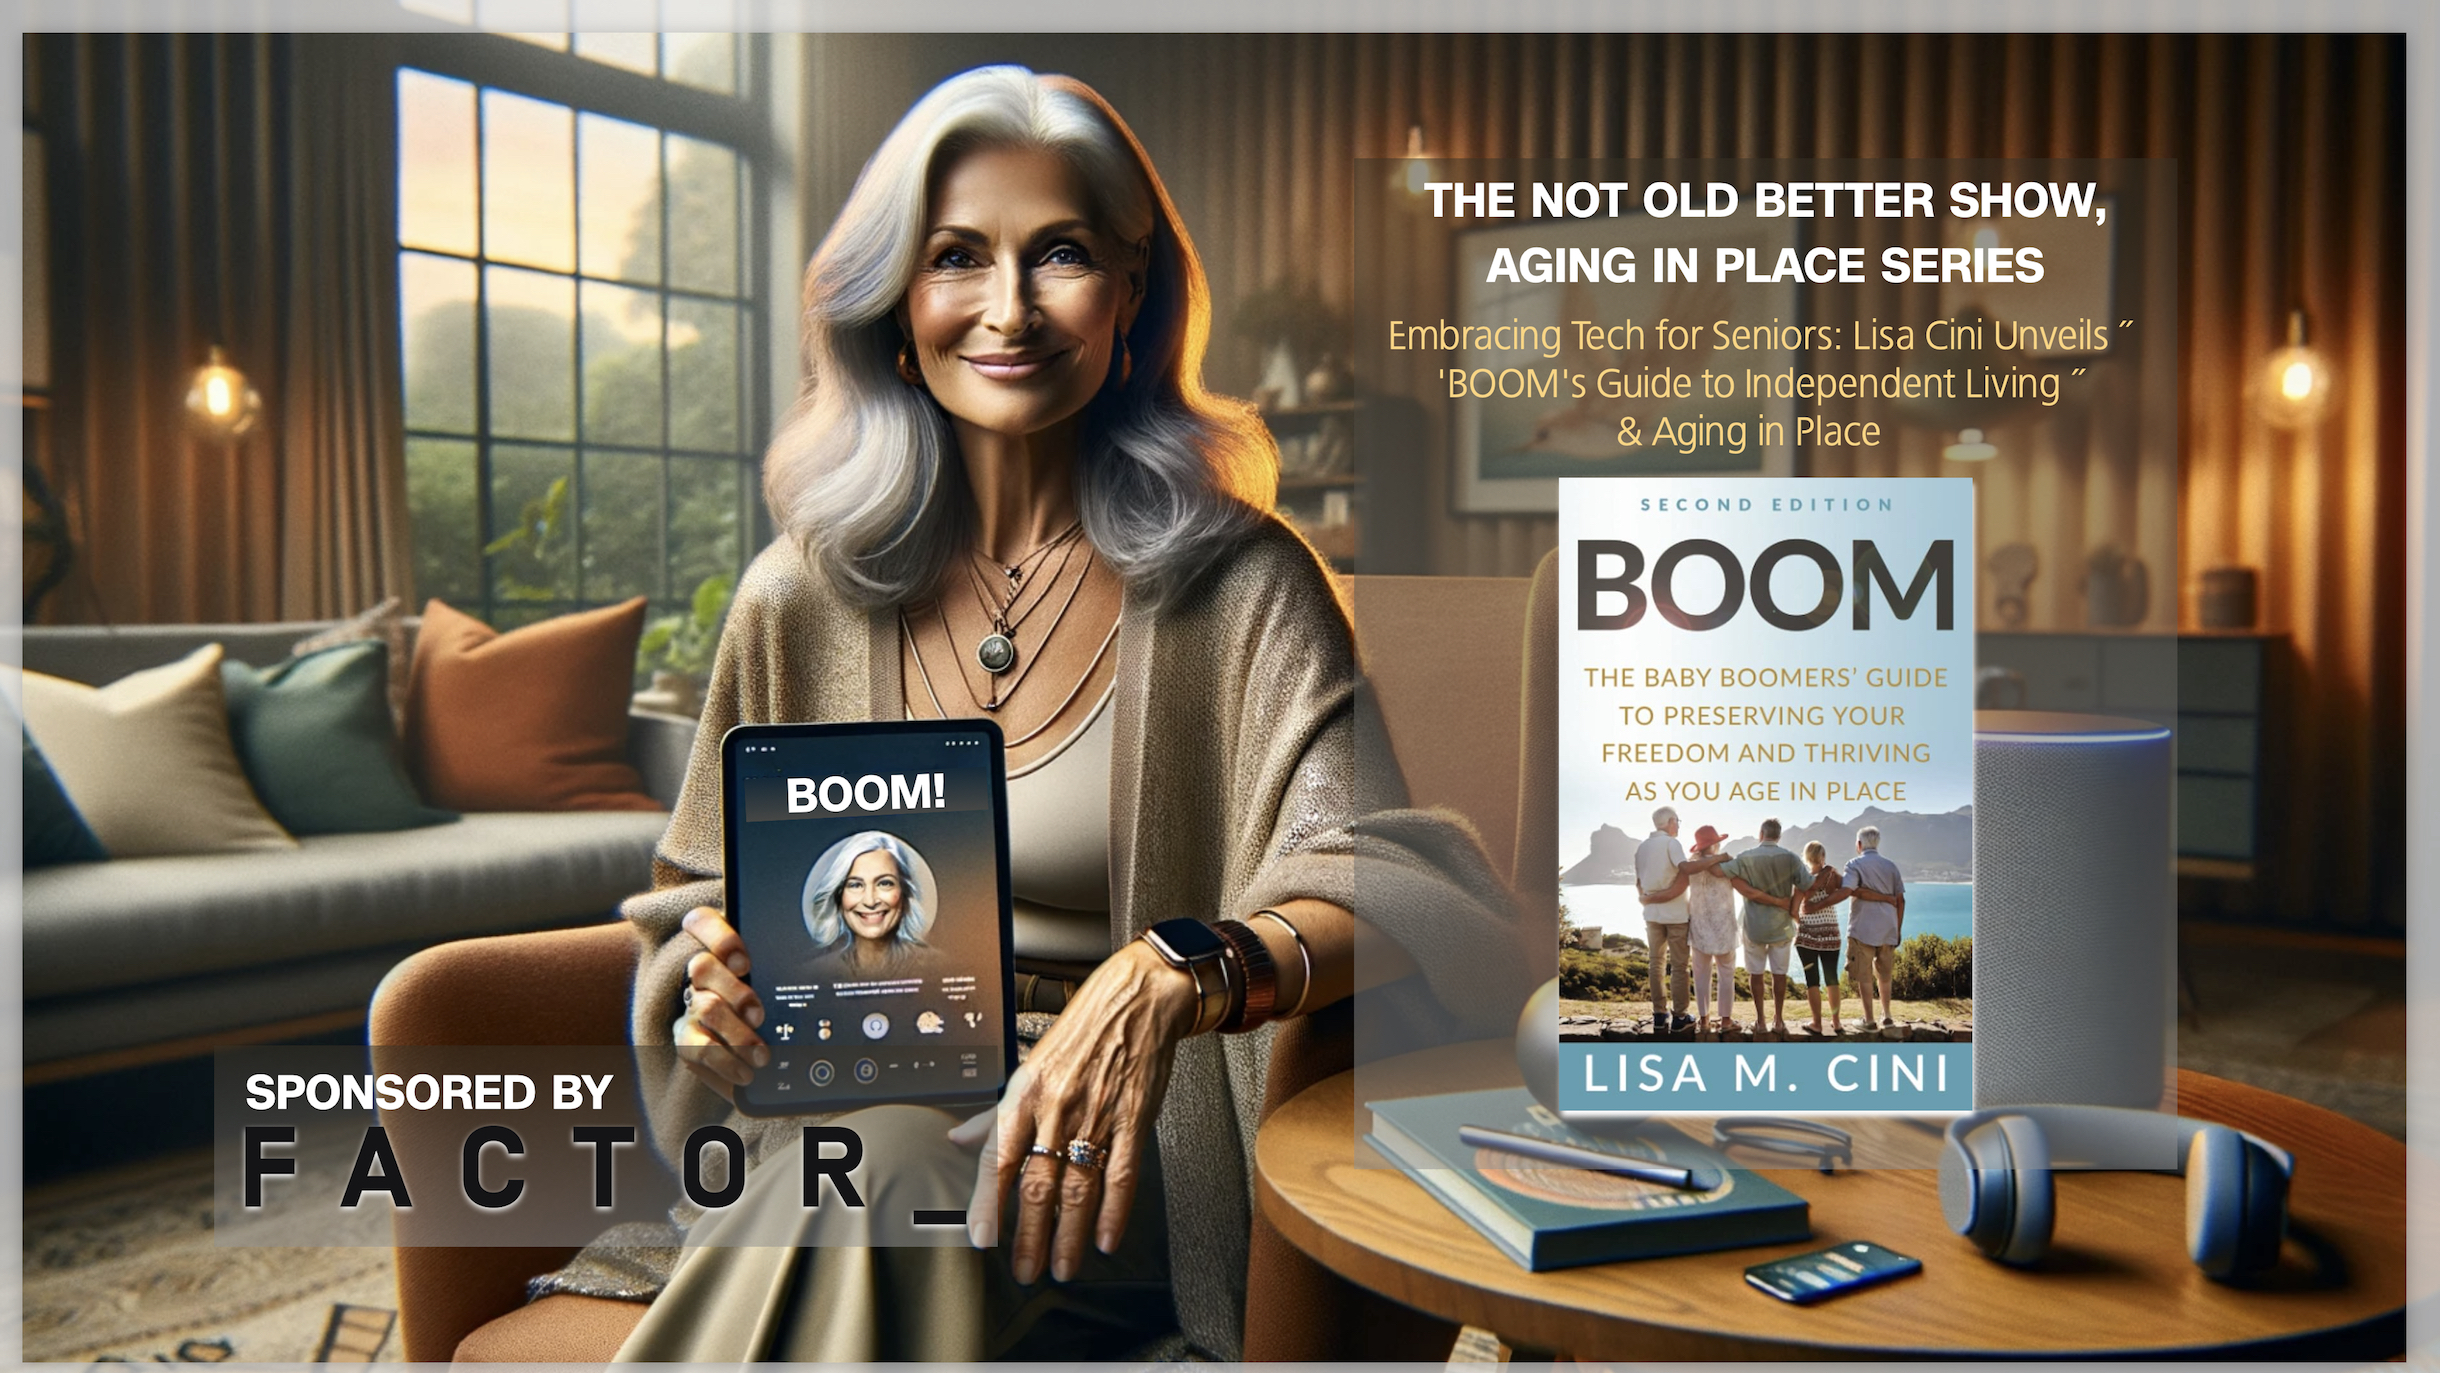 Embracing Tech for Seniors: Lisa Cini Unveils ‘BOOM’s Guide to Independent Living & Aging in Place